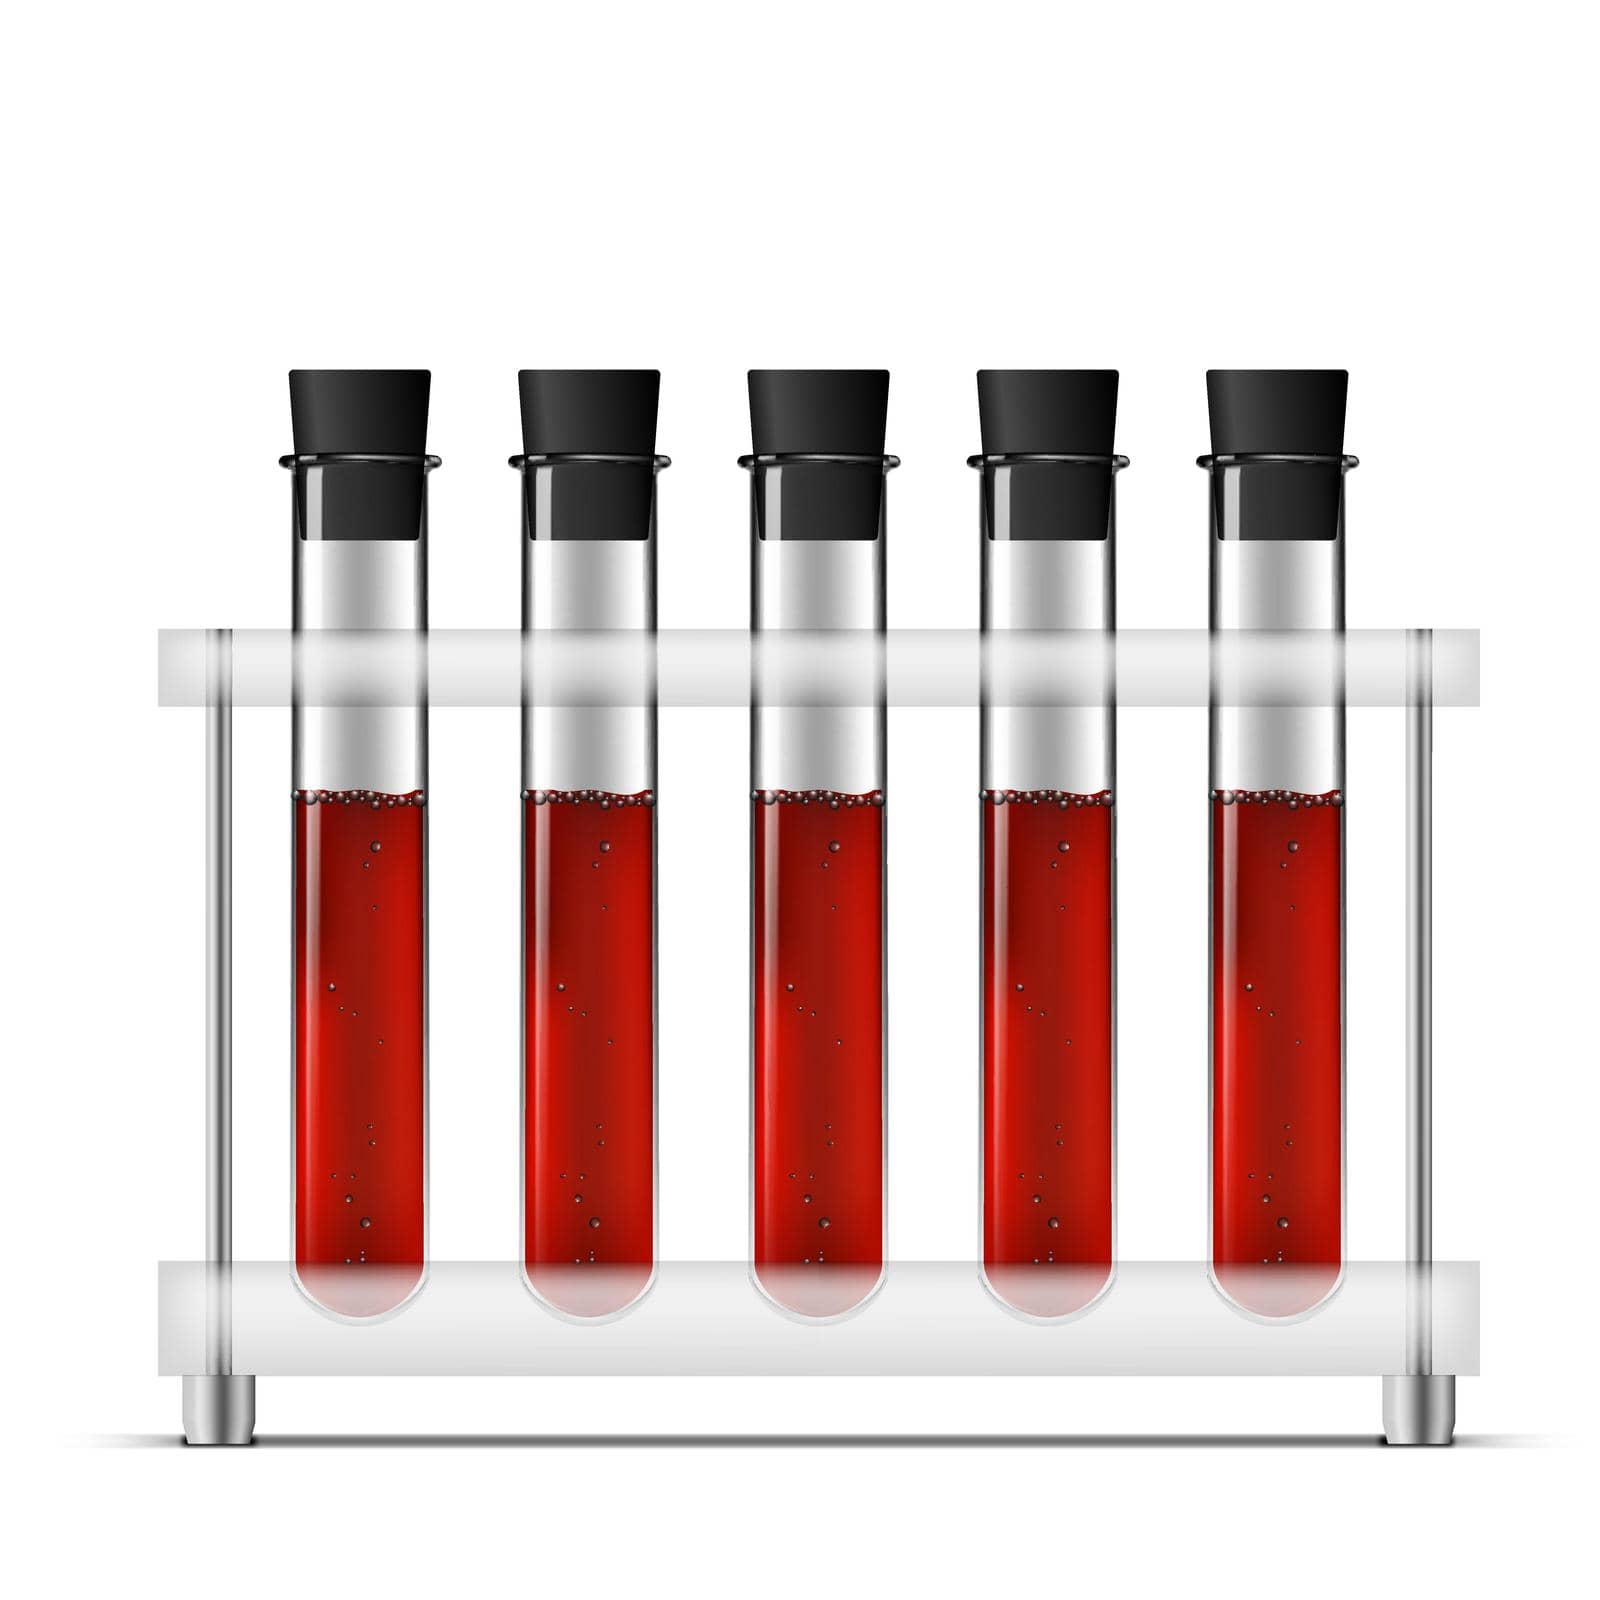 Test Tubes Filled With Blood. EPS10 Vector